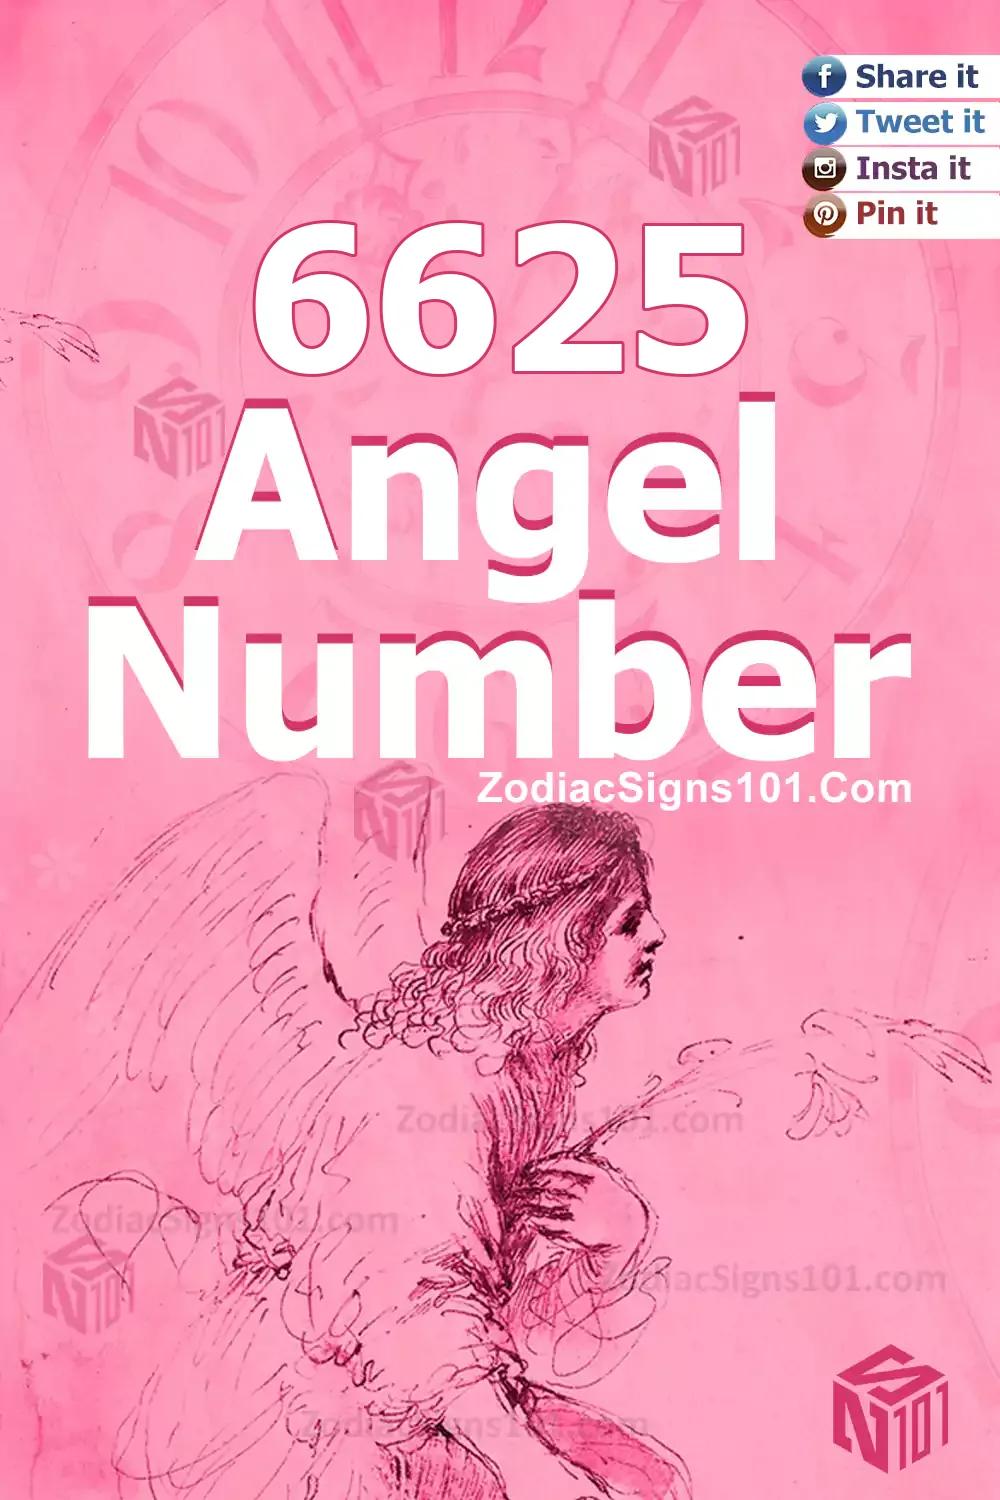 6625 Angel Number Meaning